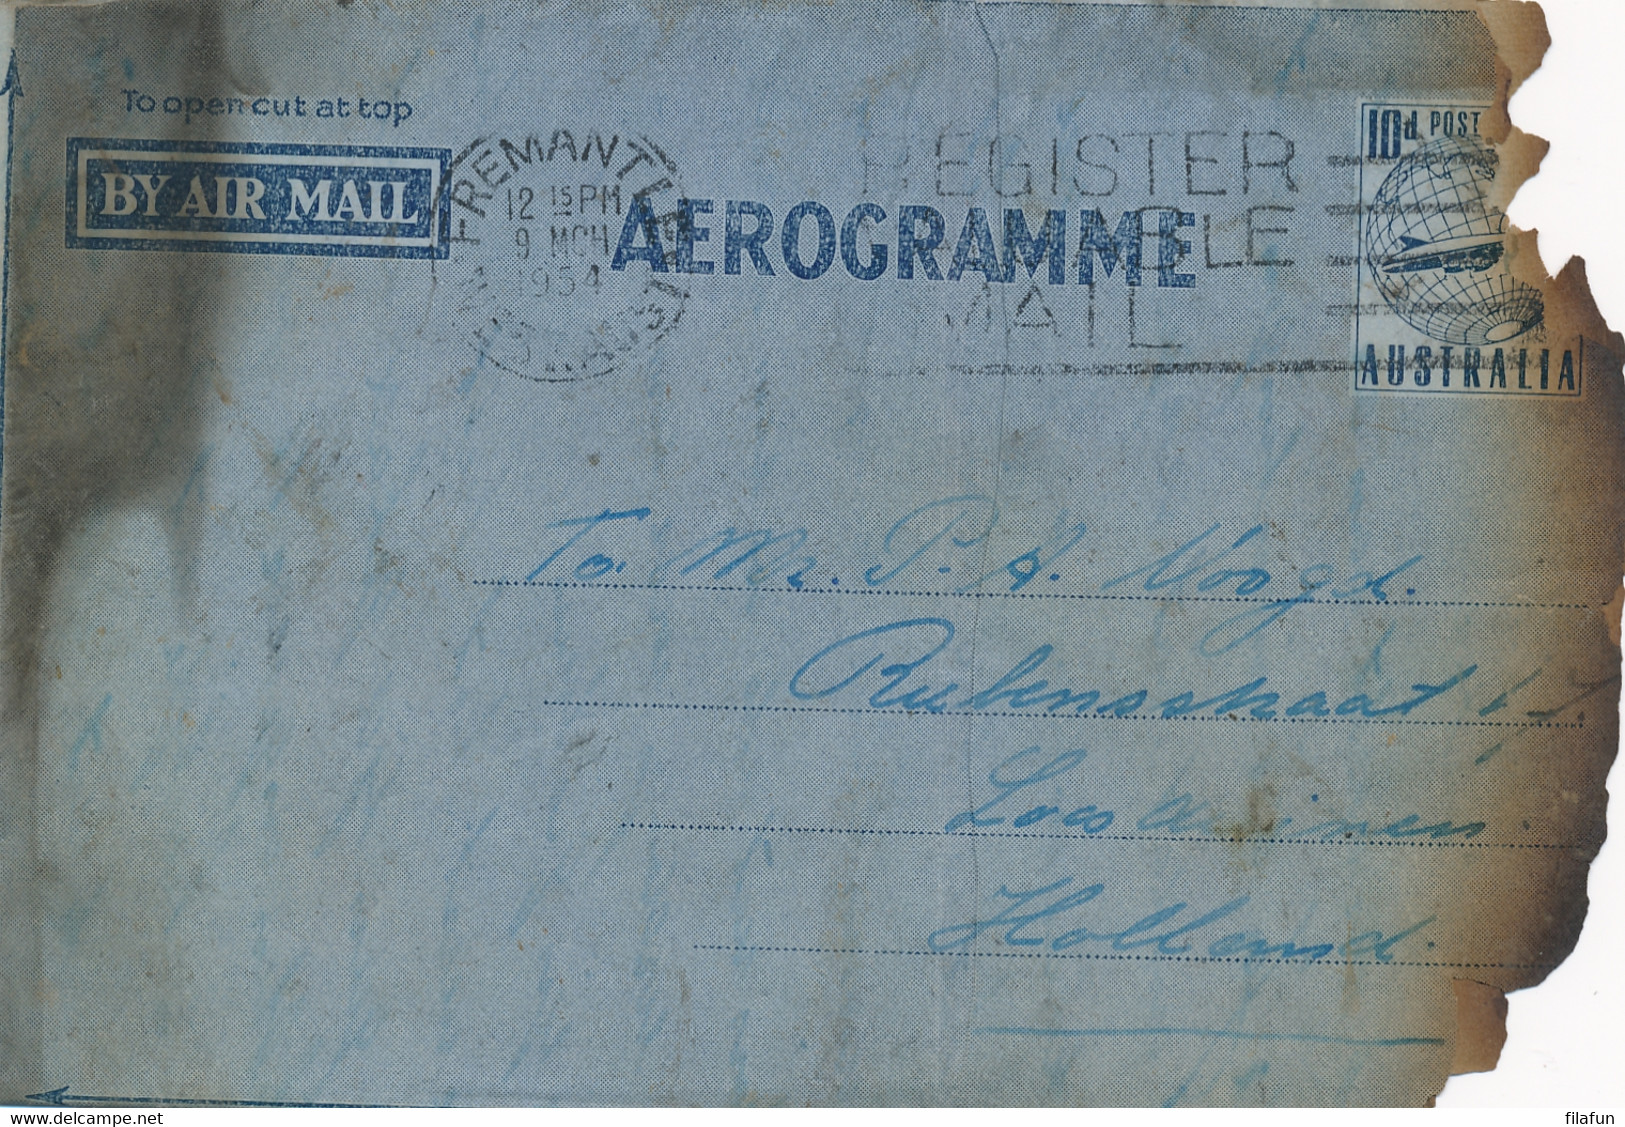 Australia - 1954 - Crashmail BOAC "Belfast" - SALVAGED MAIL AIRCRAFT CRASH SINGAPORE Etc Forwarded In Service Cover - Covers & Documents